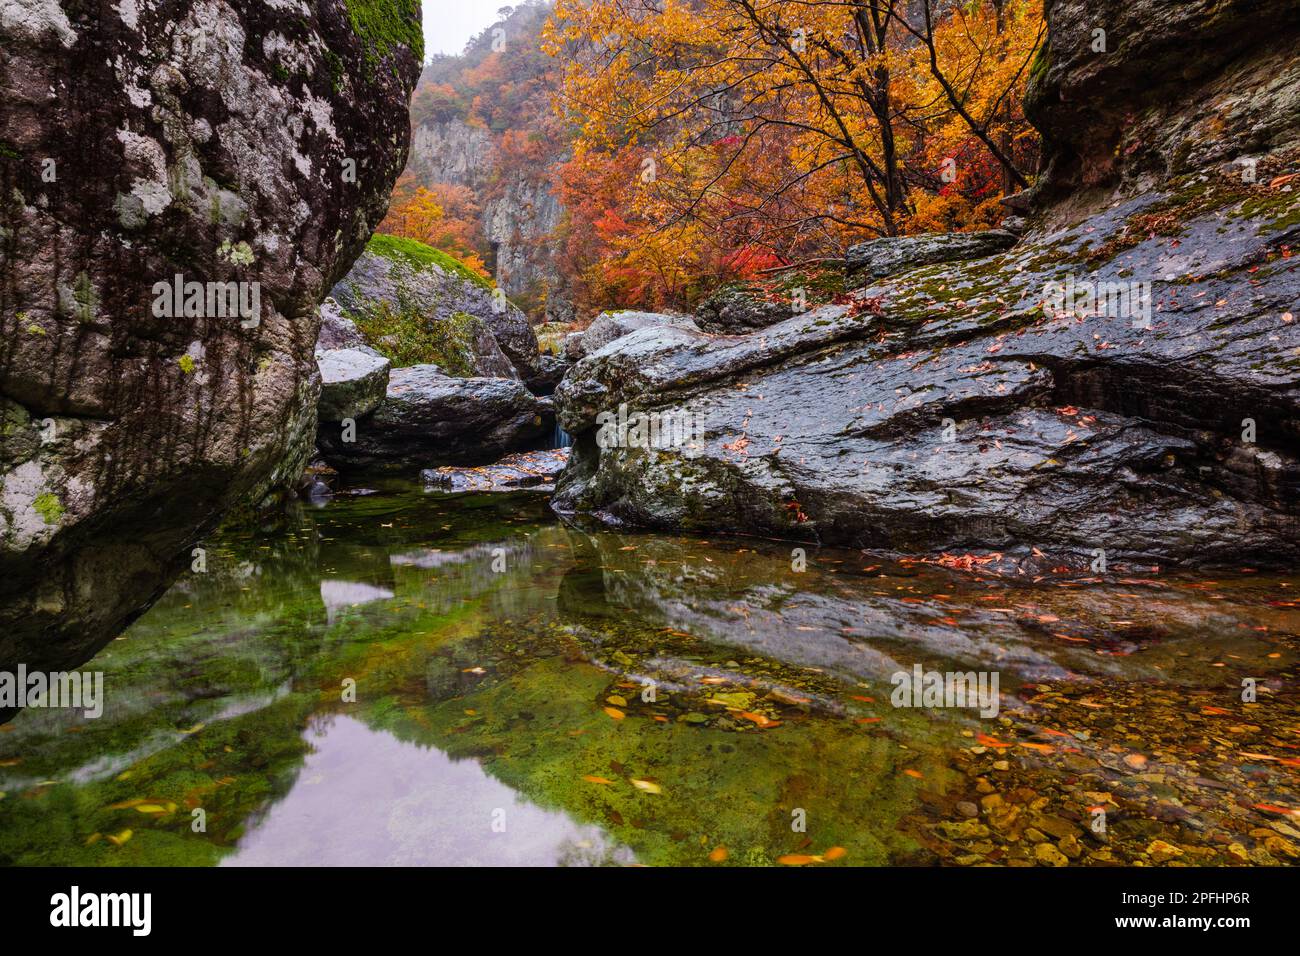 Rainy autumn mountain, valley foliage landscape. Clear water flowing between colorful maple trees and rocks in the valley. Stock Photo